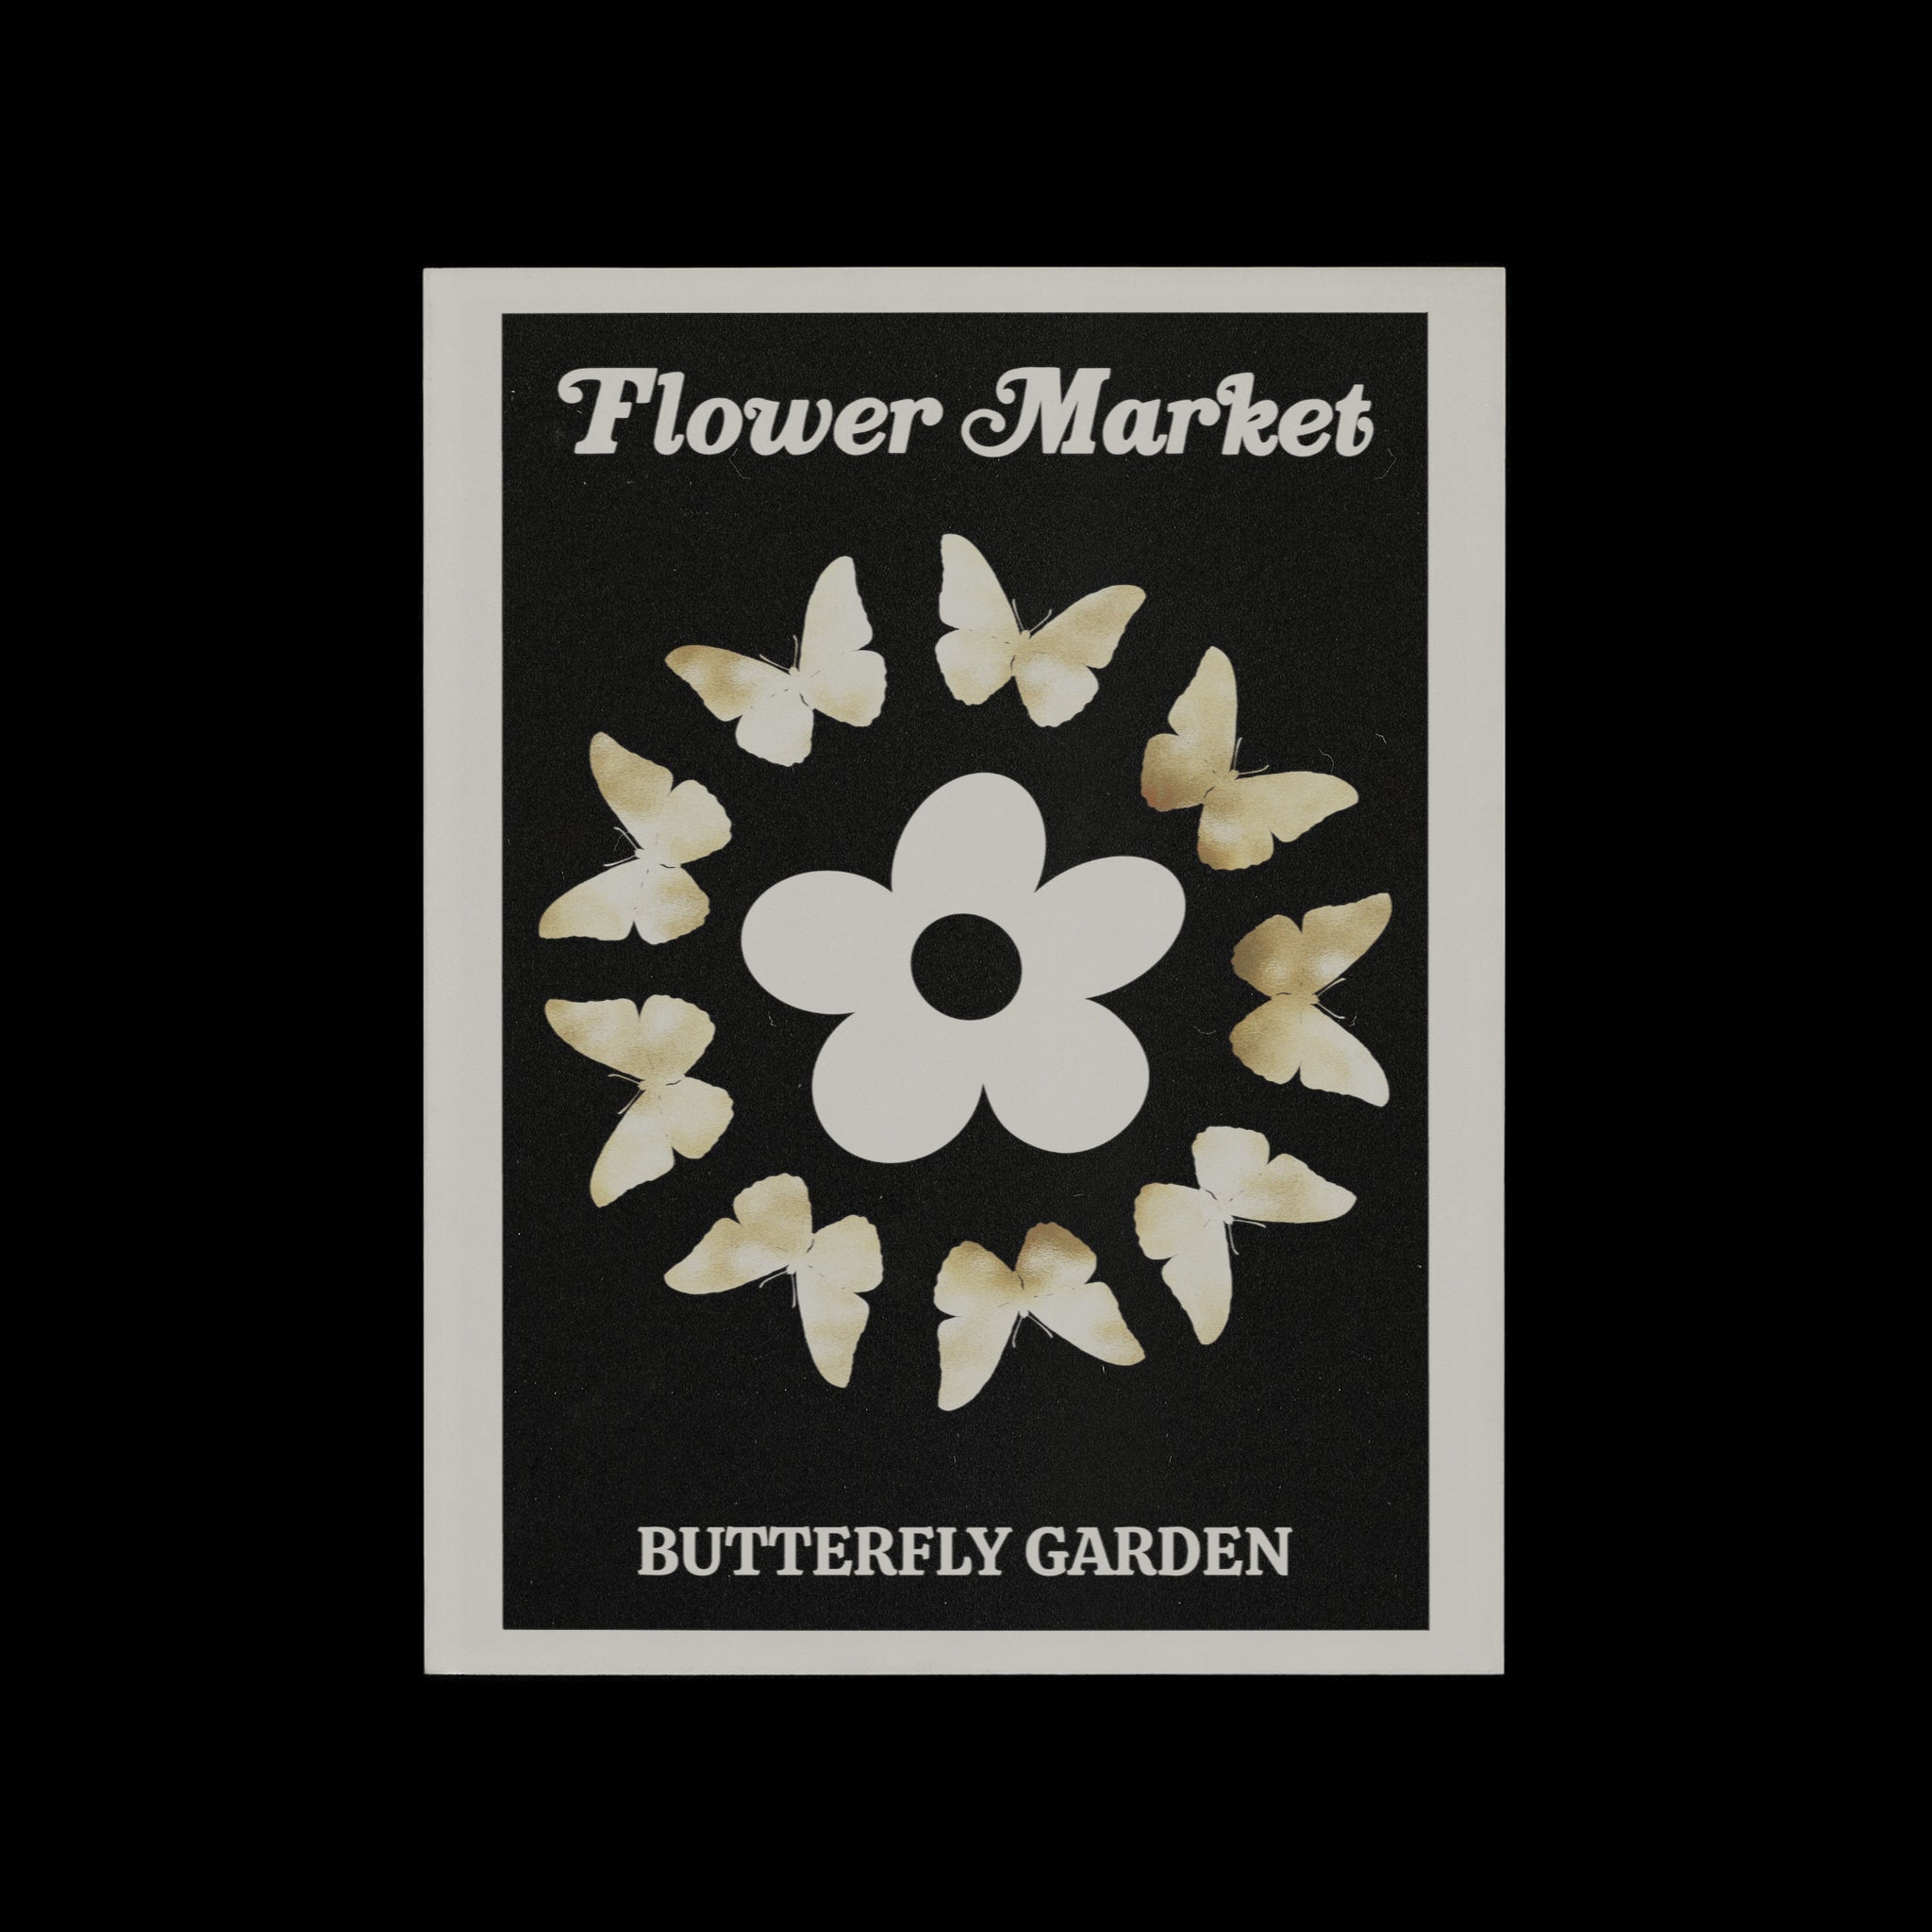 © les muses / Our Flower Market / Butterfly Garden collection features art prints with a retro daisy design and an illustration of butterflies under original hand drawn typography. The danish pastel
poster is an aesthetic addition to any gallery wall.